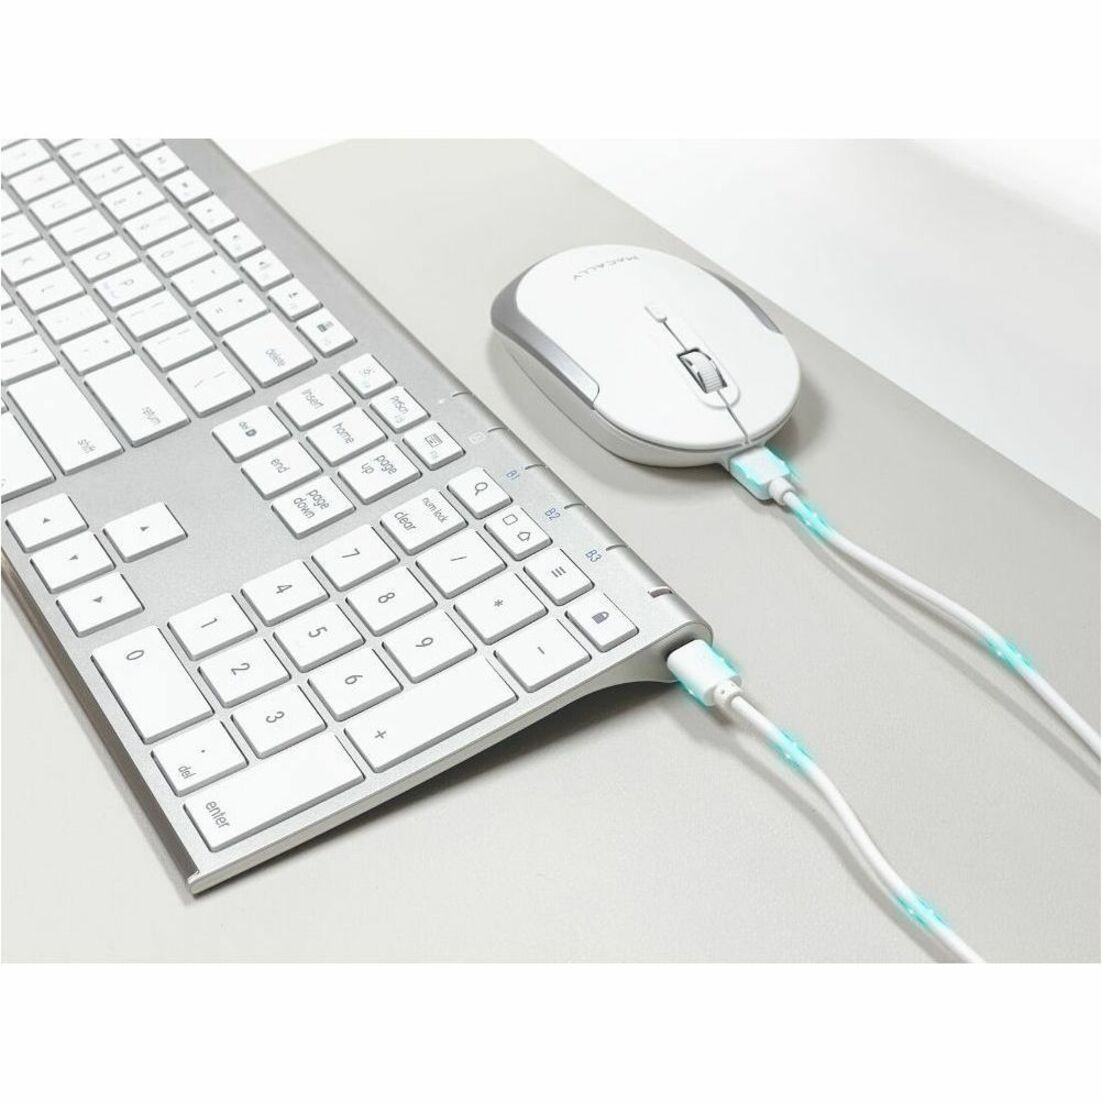 Macally ACEBTKEYACB Bluetooth Keyboard and Mouse for Mac, Rechargeable Battery, Quiet Keys, Ergonomic, Aluminum